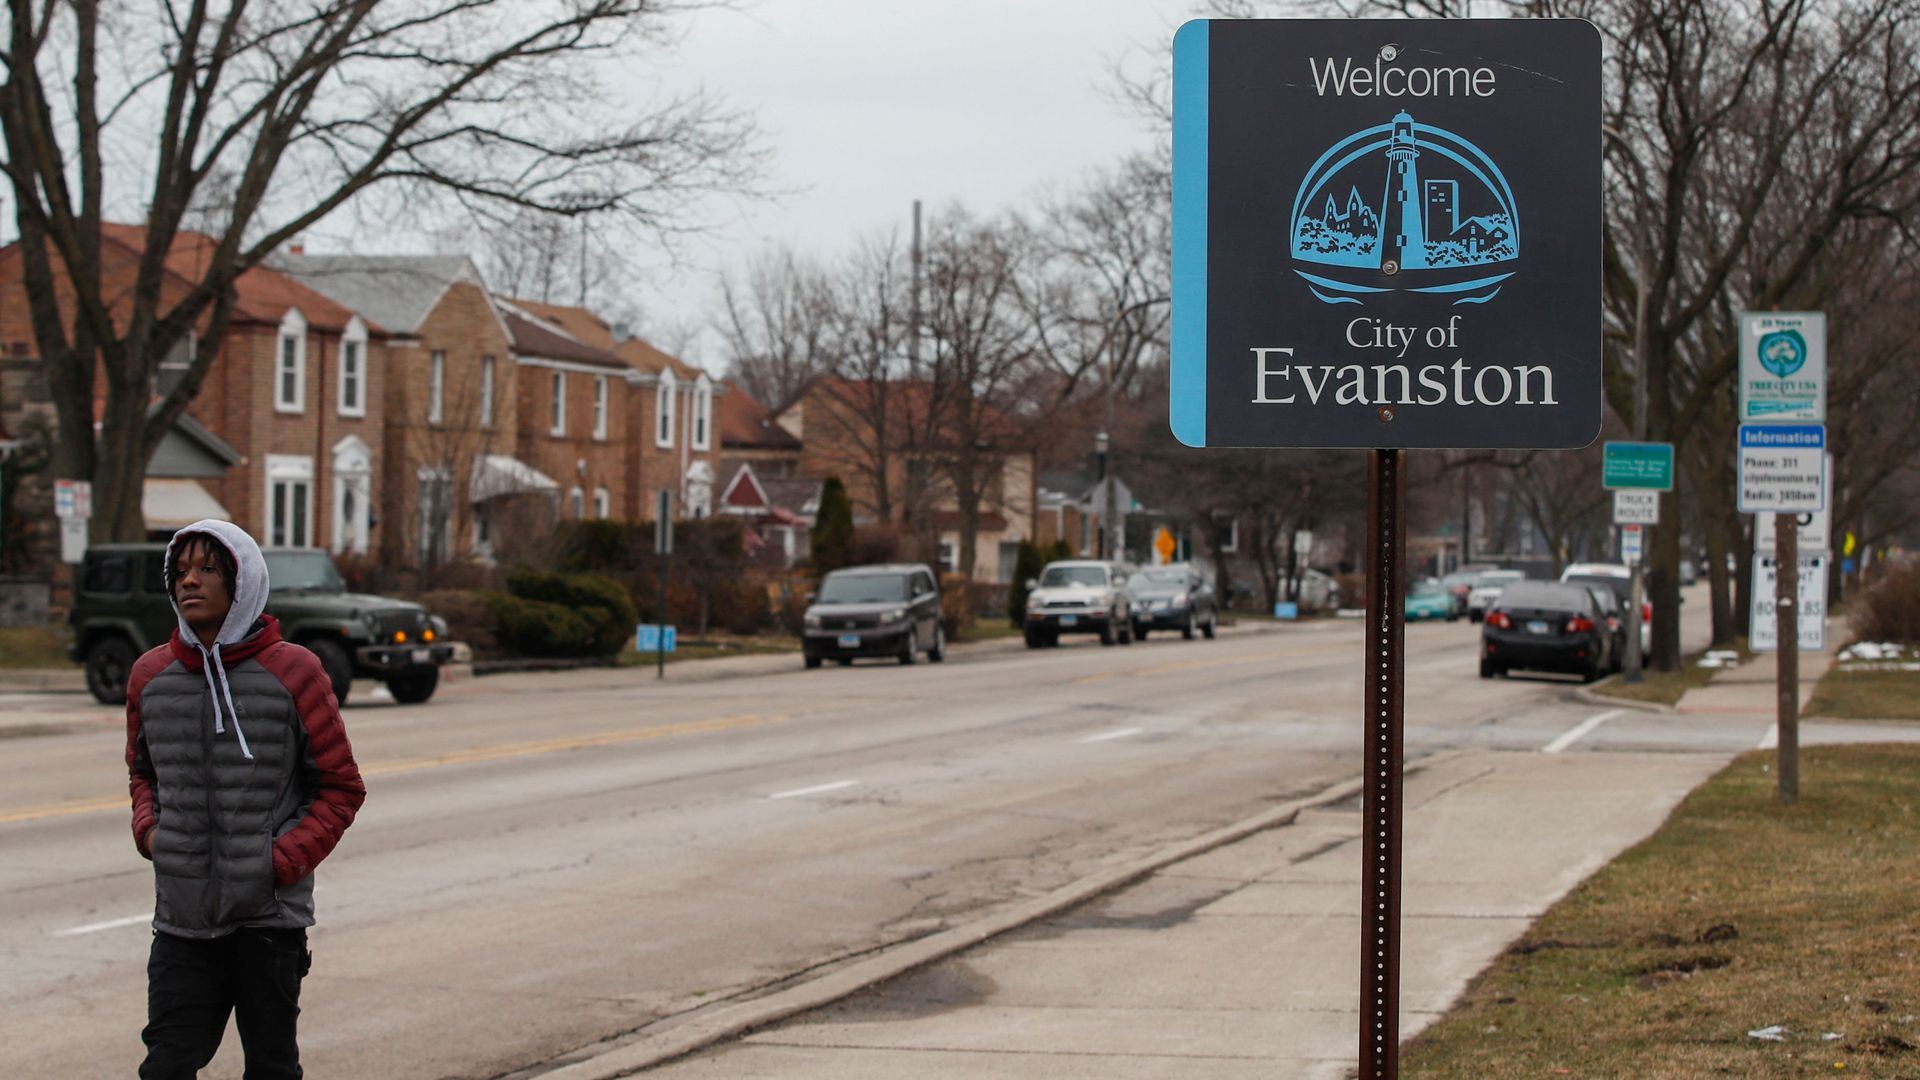 A man walks by a sign welcoming people to the city of in Evanston, Illinois, on March 16